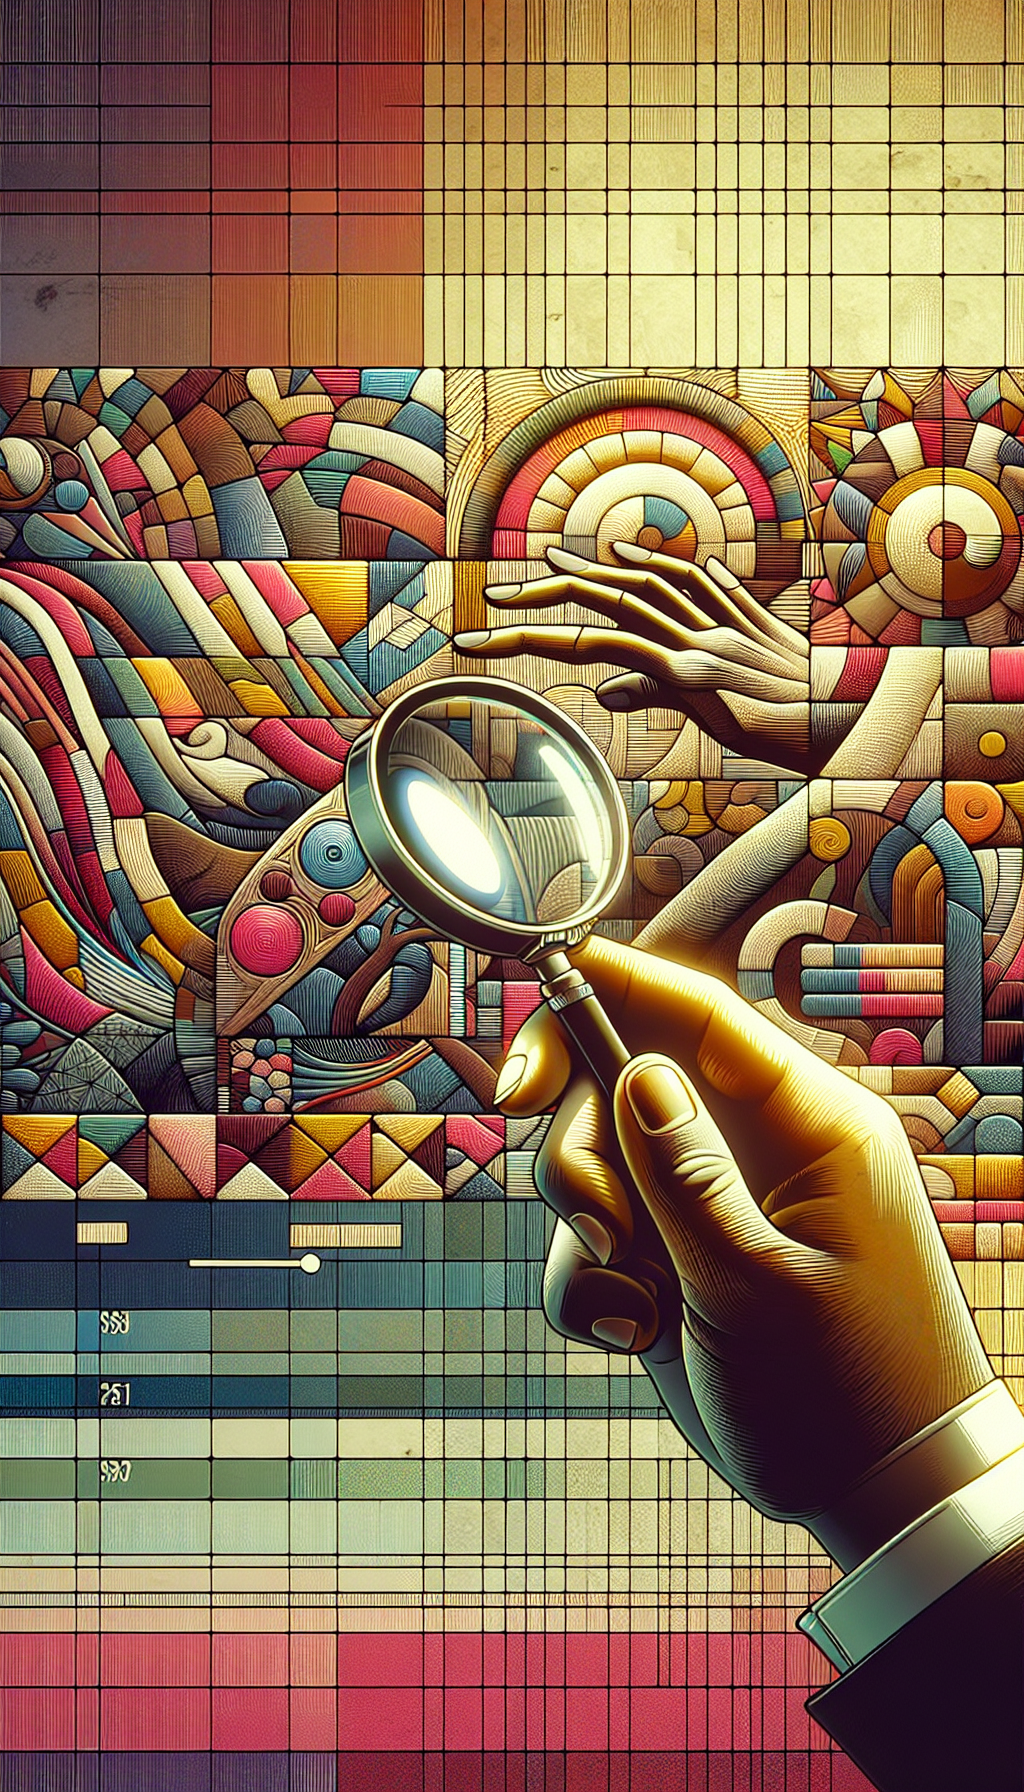 An illustration of a collector's hand gracefully holding a magnifying glass over a mosaic of vibrant Charles Bibbs' artworks, spotlighting certain elements like authenticity marks and signatures. Around the edges, a subtle gradient of increasing dollar values emphasizes the appreciating investment, while the bold, fluid lines typical of Bibbs’ style frame the composition, symbolizing both confidence and the essence of his art value.